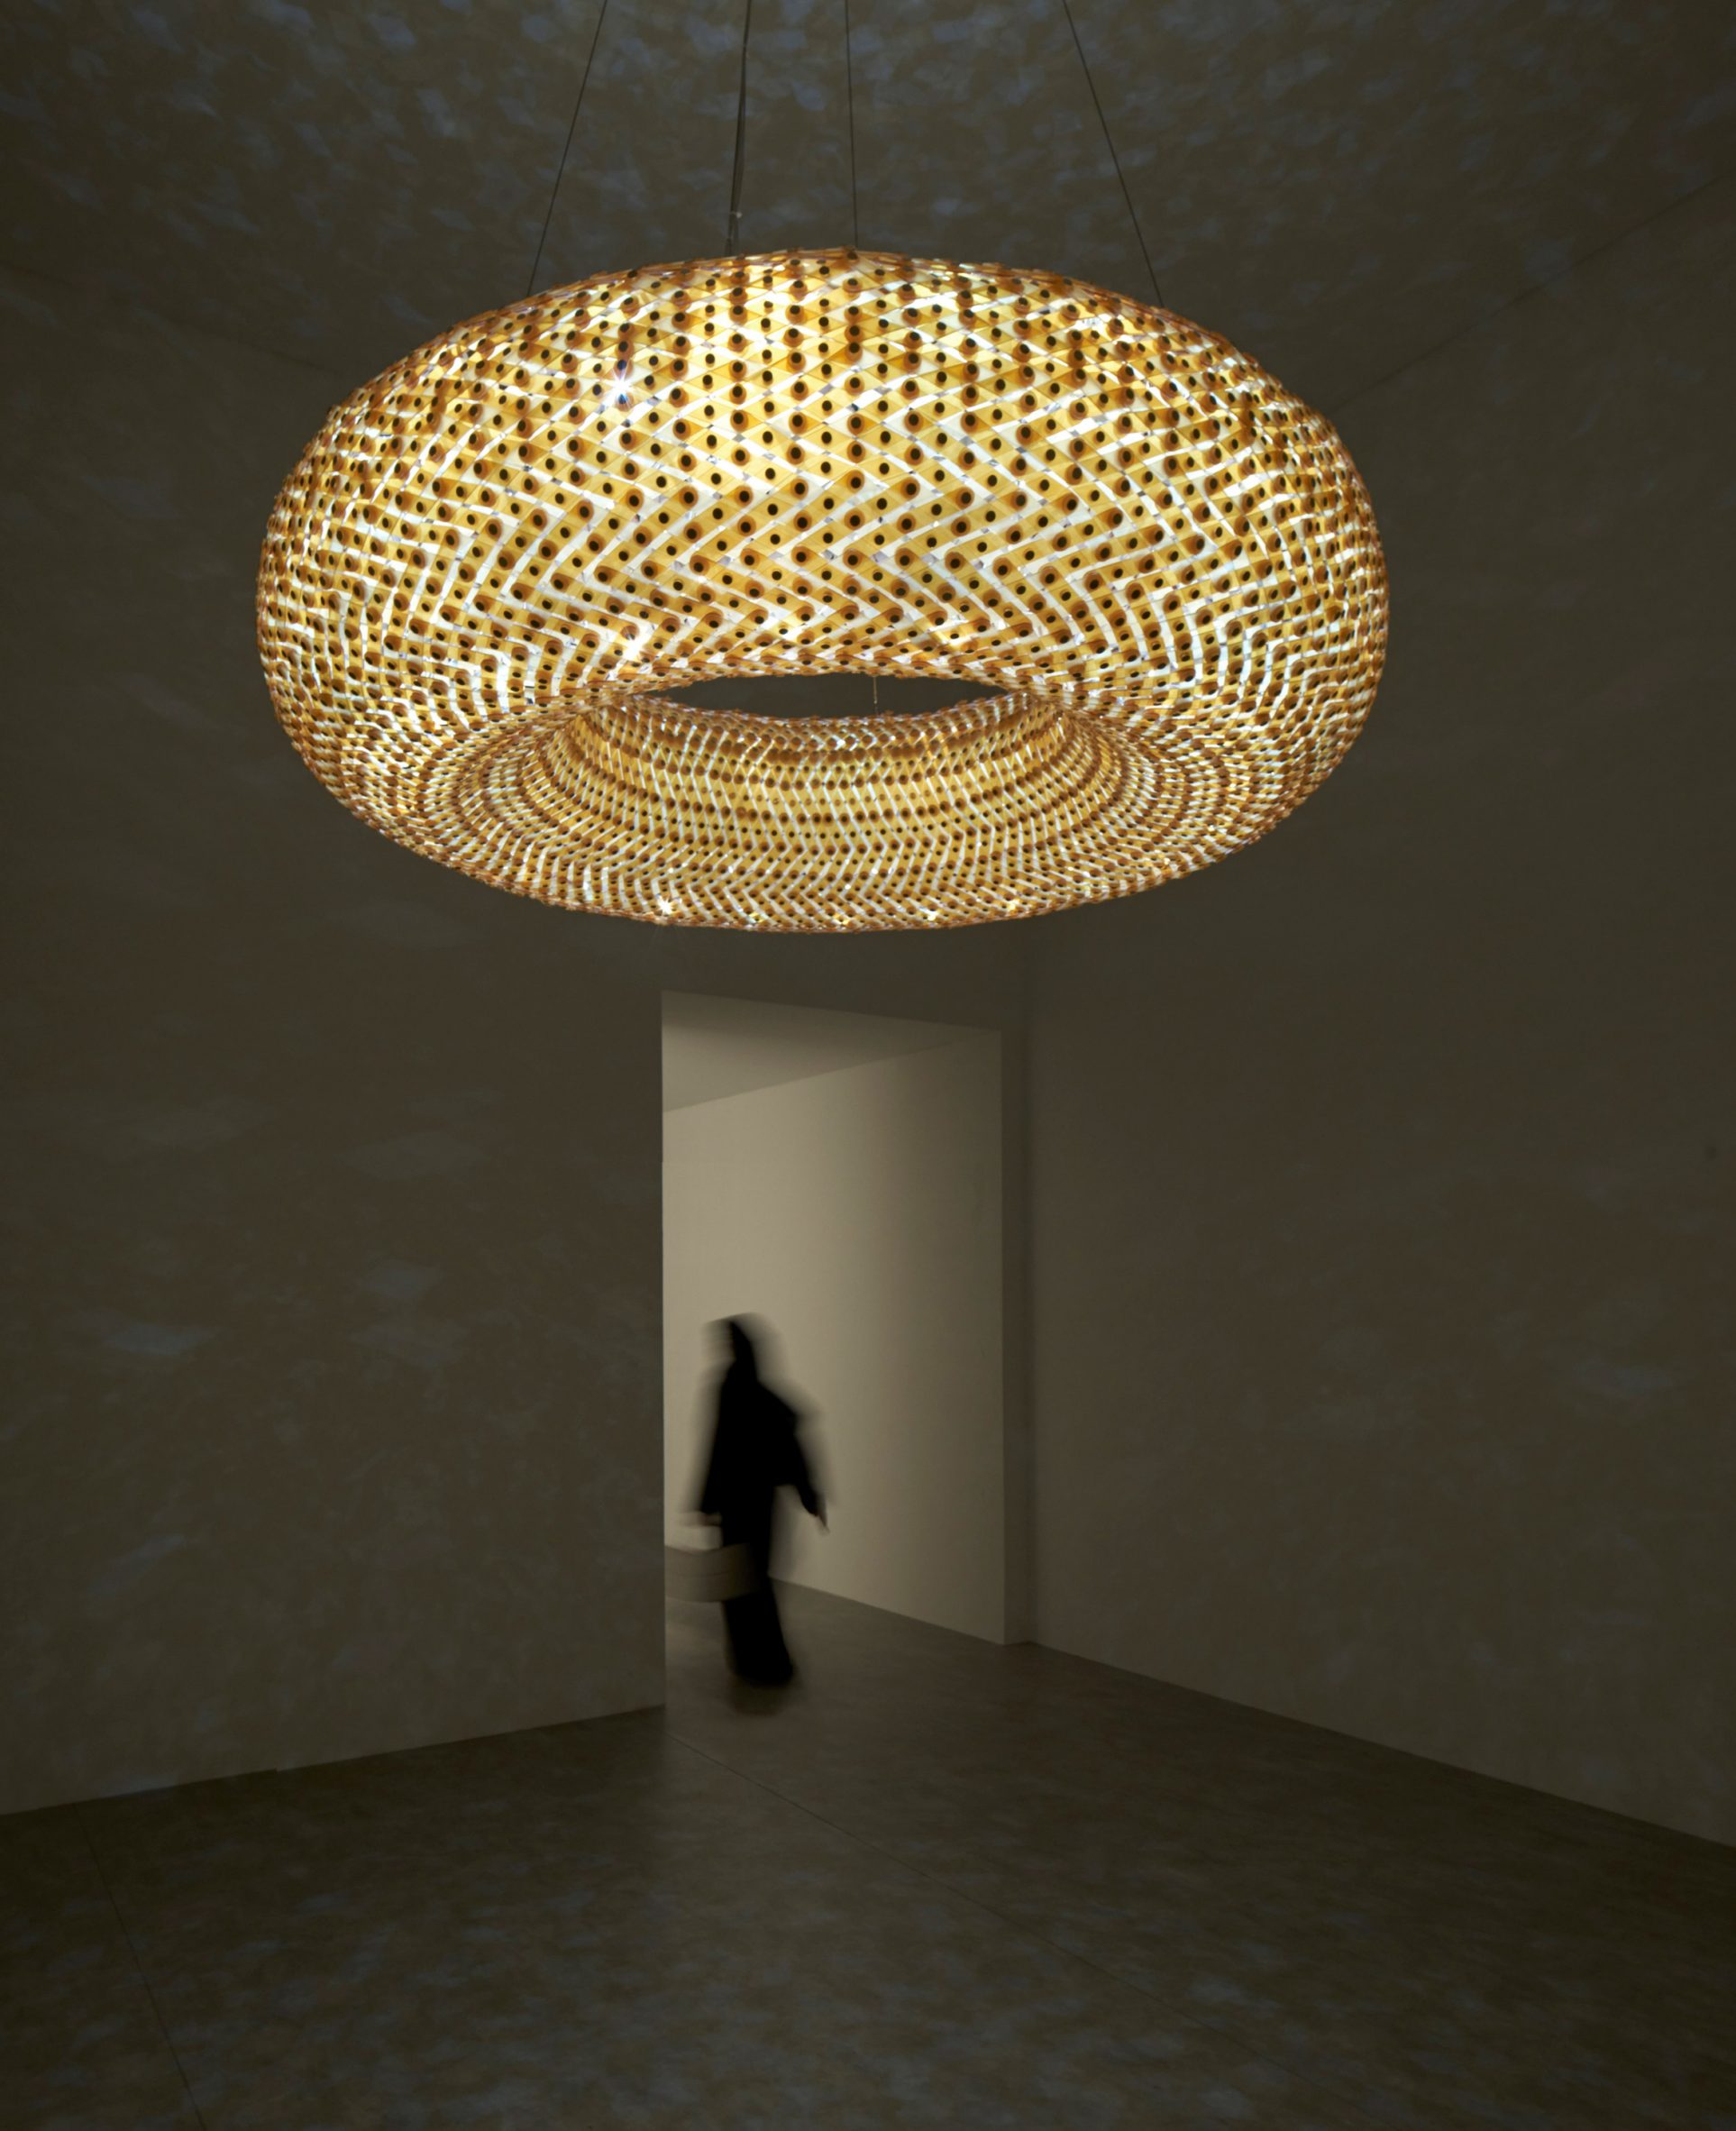 Constellations 2.0: Object. Light. Consciousness by Abeer Seikaly